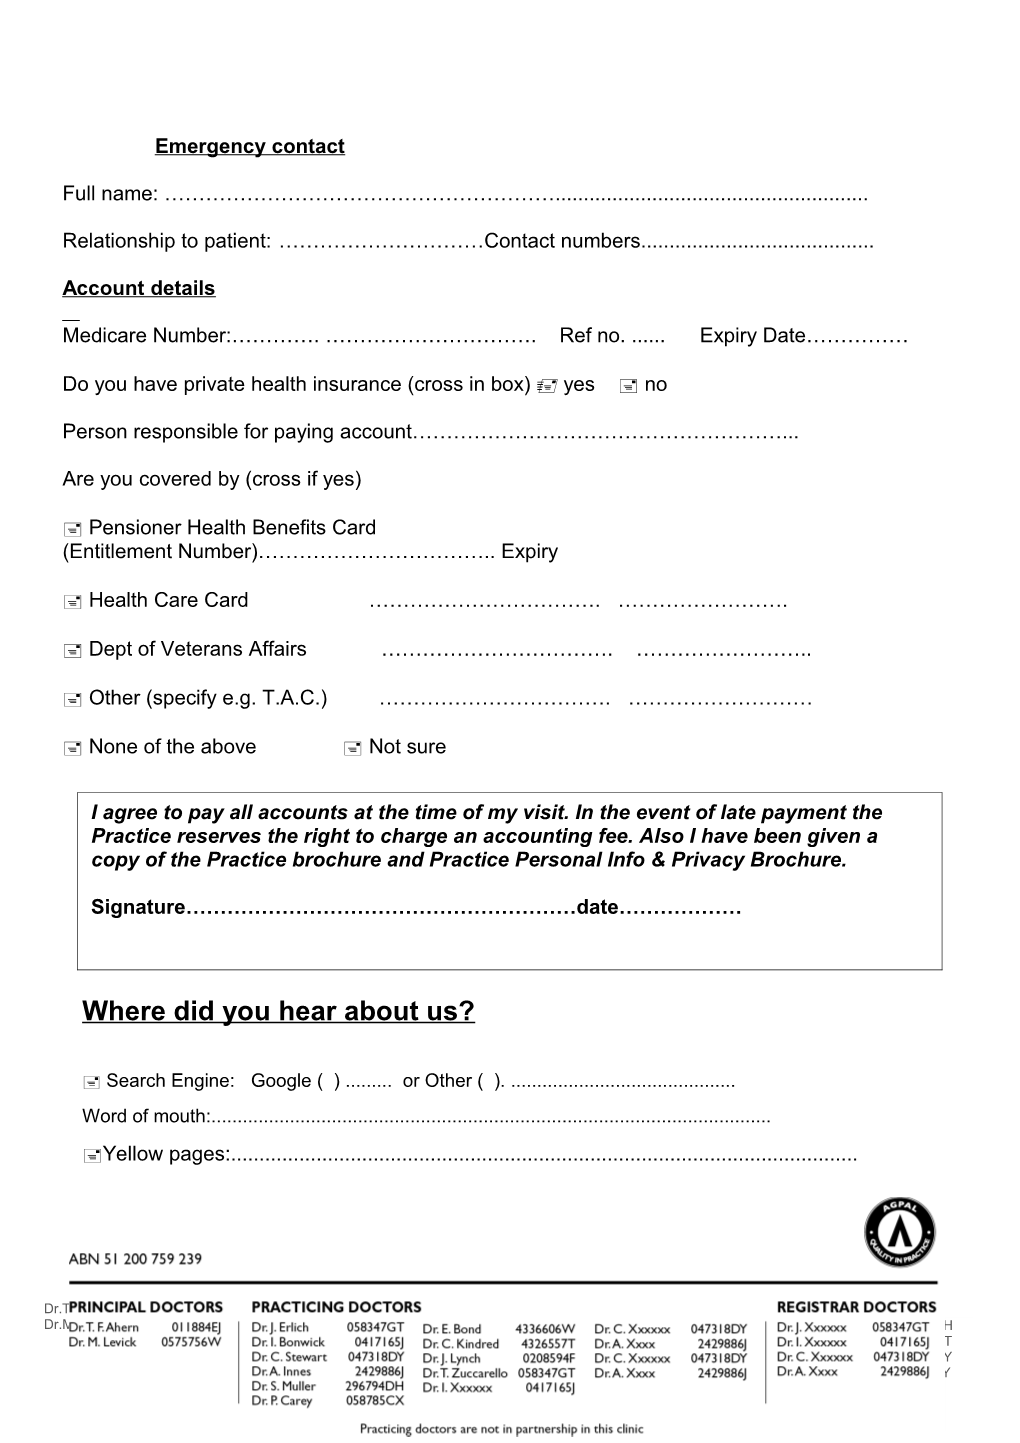 Please Complete This Form Prior to Seeing Your Doctor